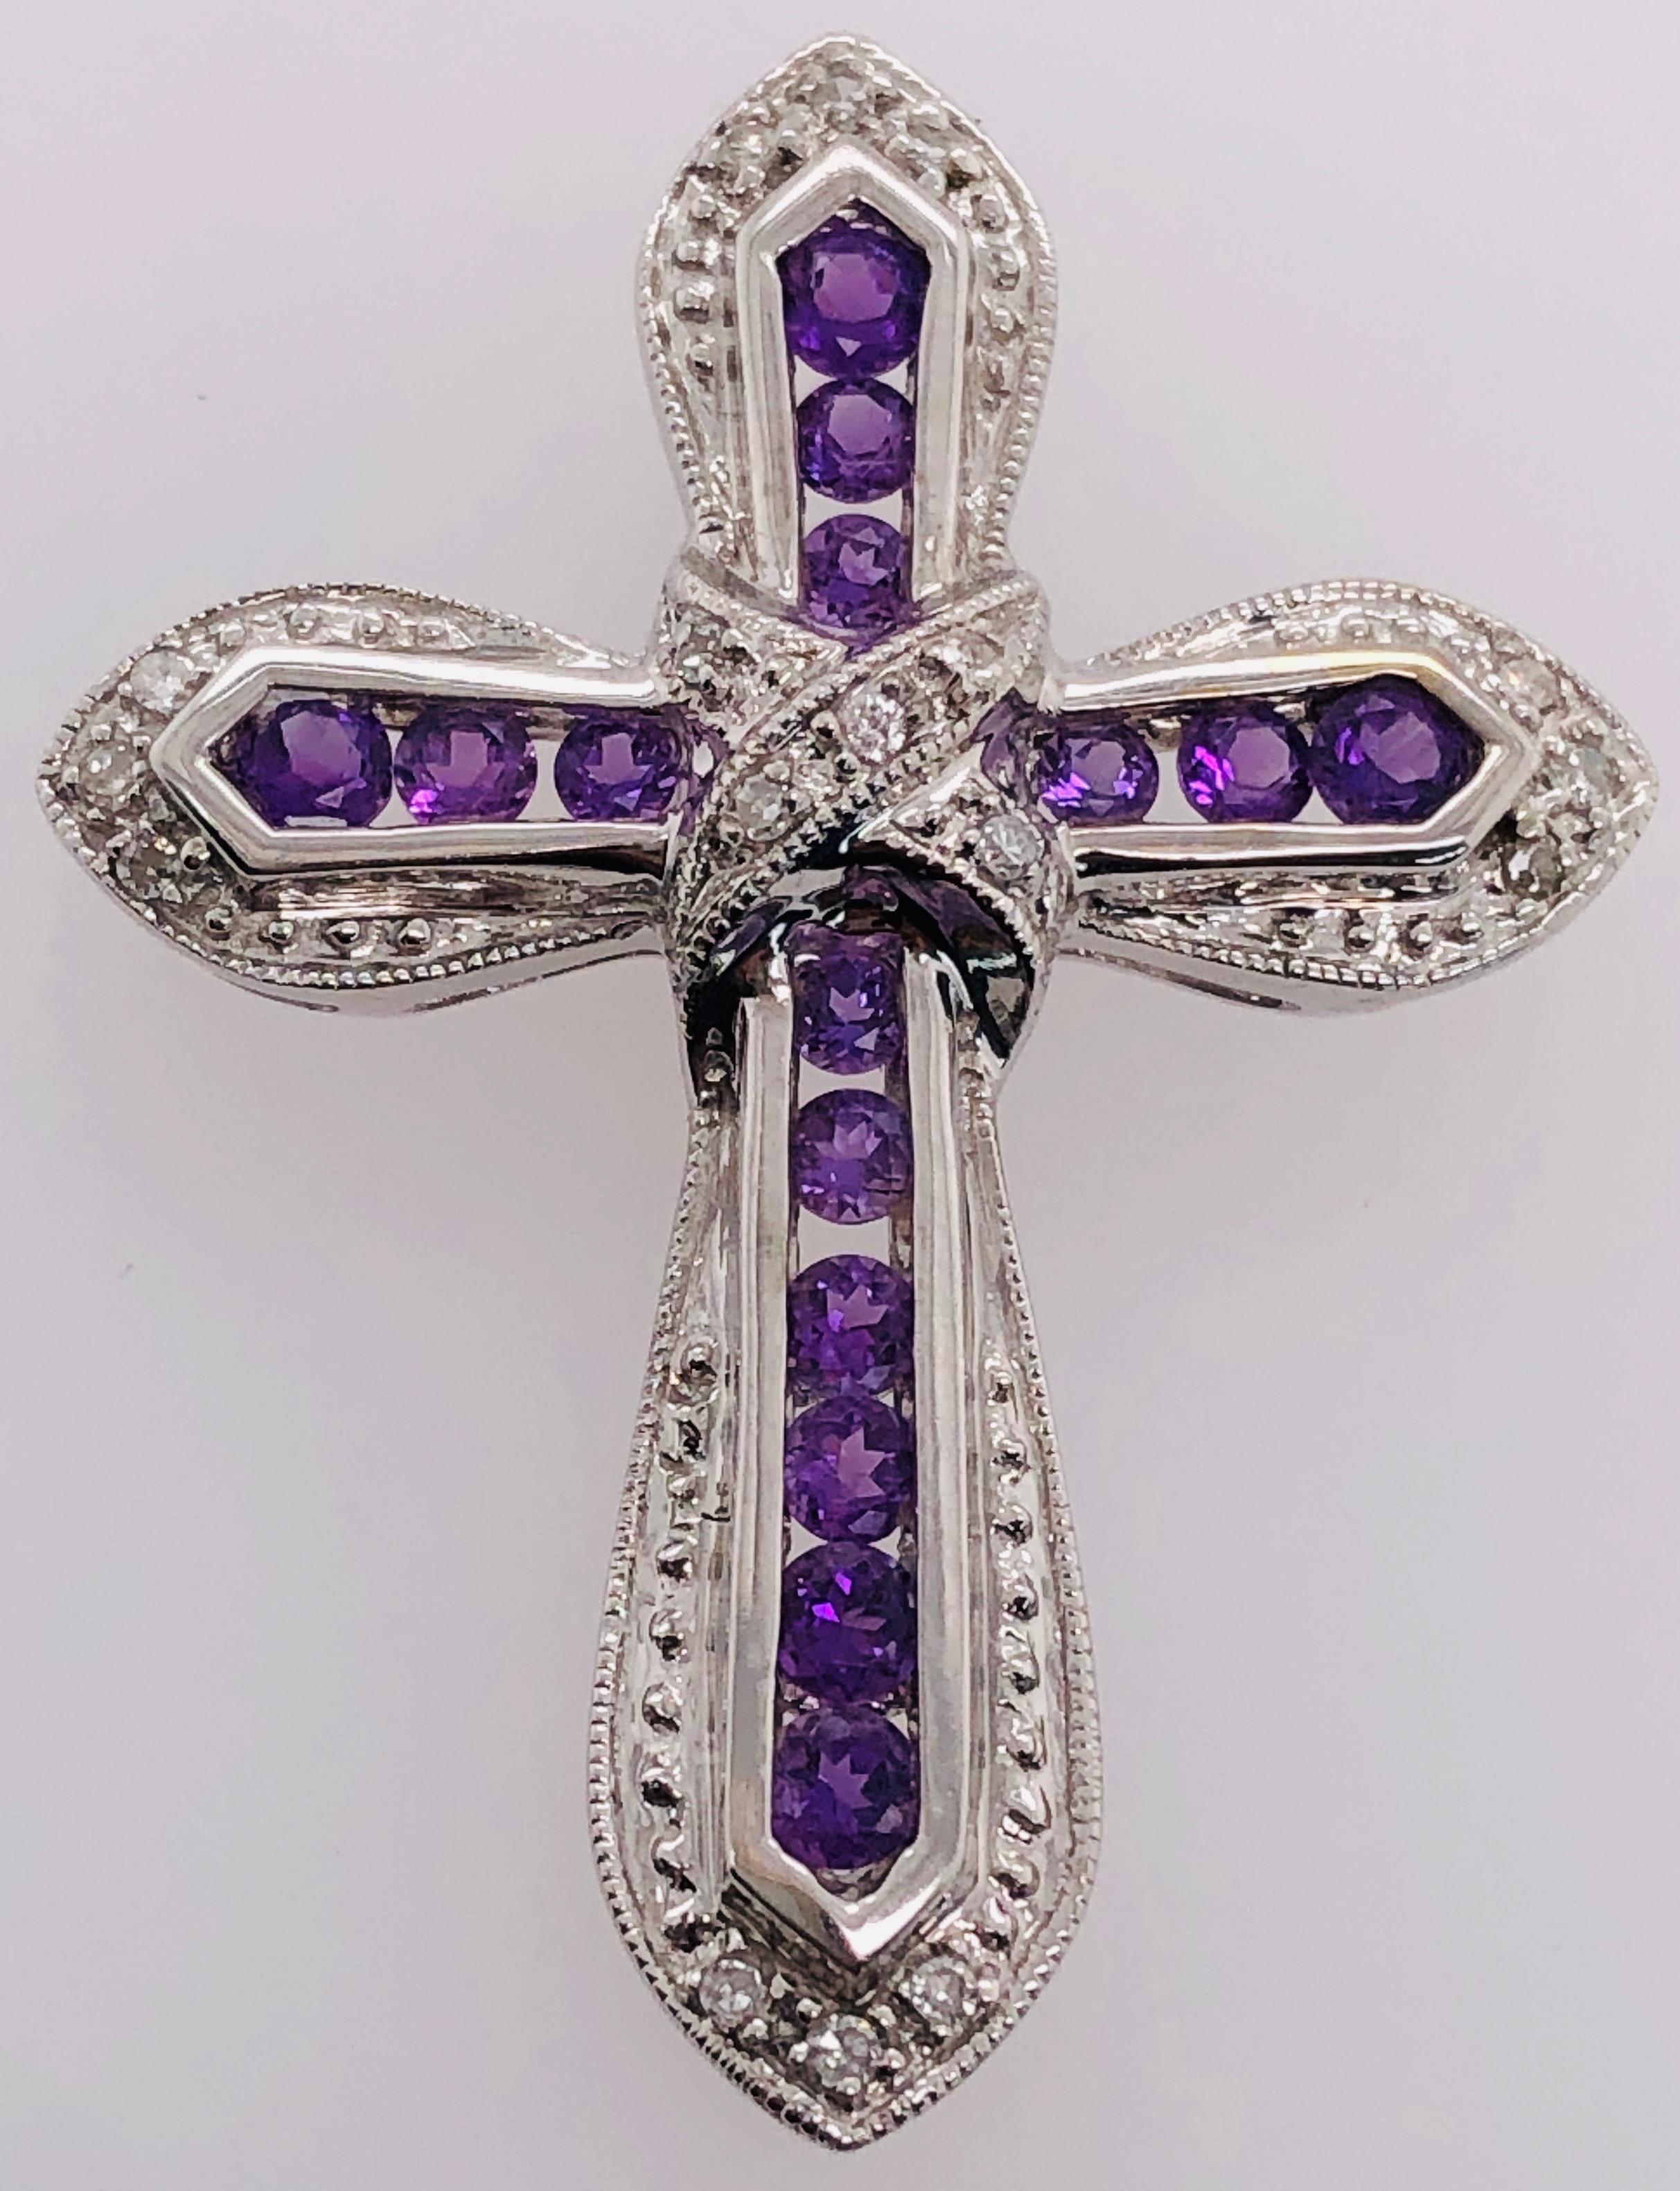 14Kt White Gold Pendant with Amethysts and Diamonds
3.76 grams Total weight. 25 by 33 MM